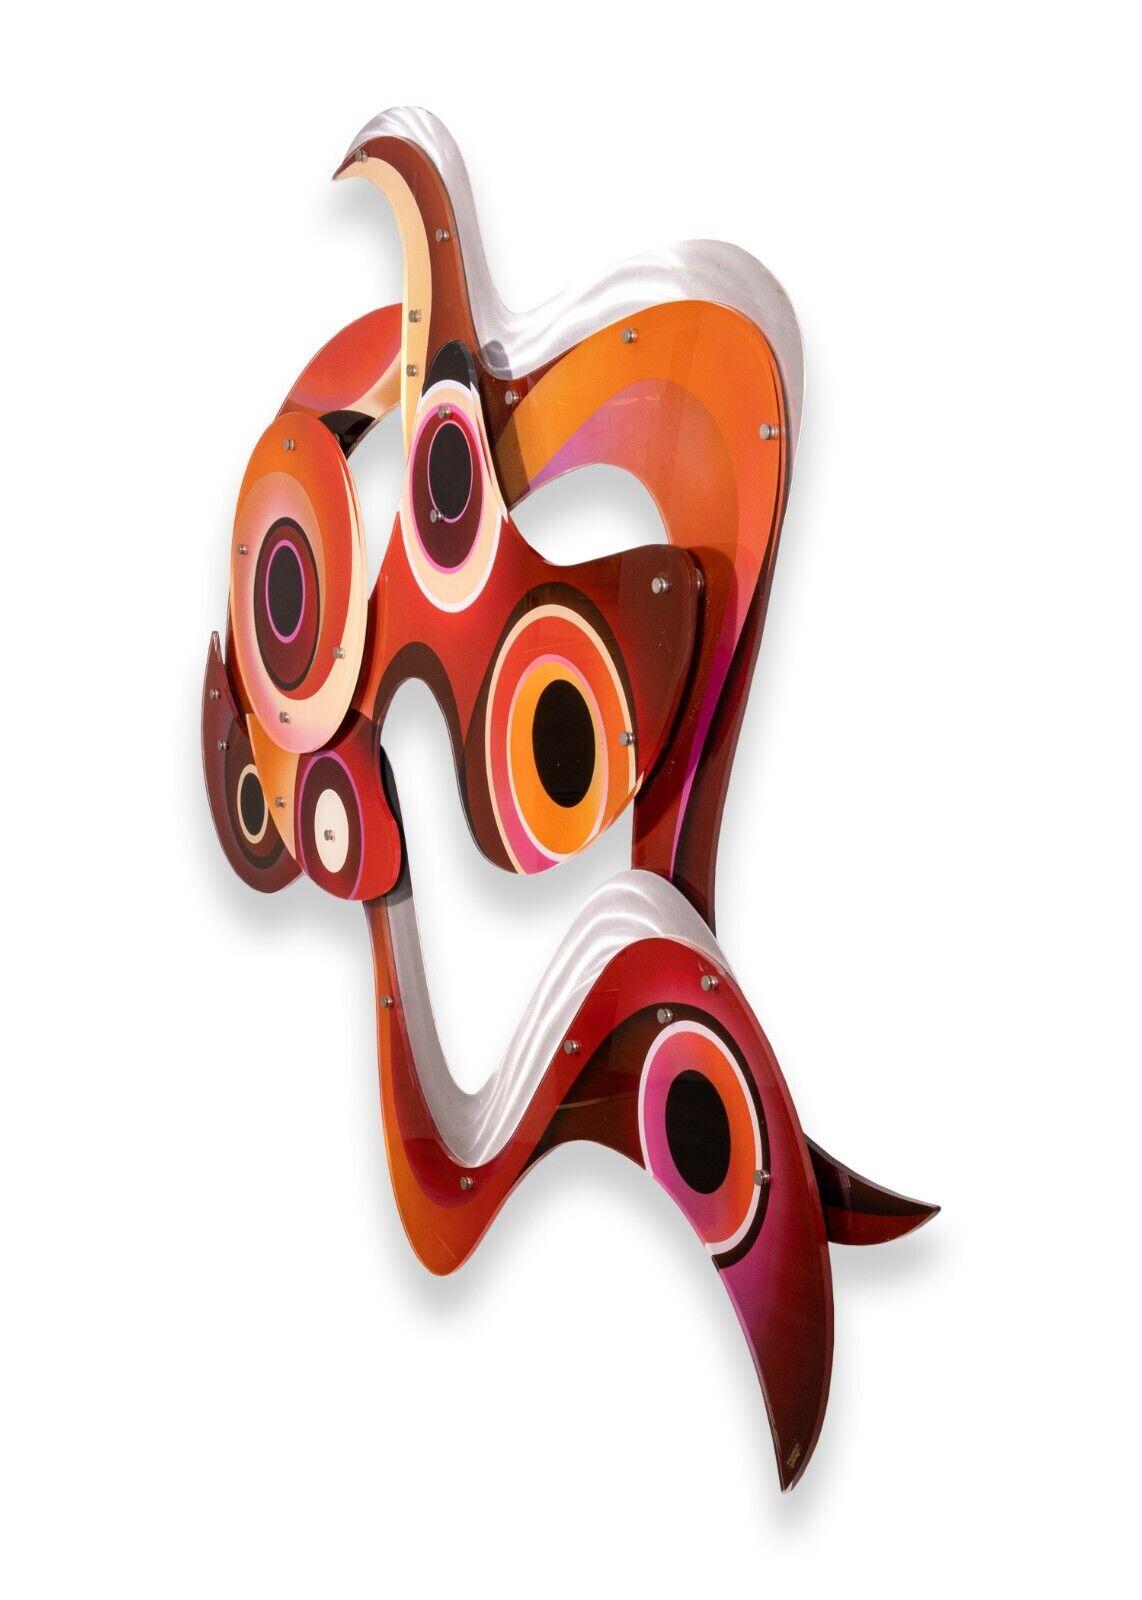 A Shlomi Hazizi acrylic and aluminum wall hanging sculpture. Hazizi is a Los Angeles based Israeli artist who specializes in acrylic and lucite multi-media based sculptures. He is most known for his post-modern colorful sculptures. This piece is a